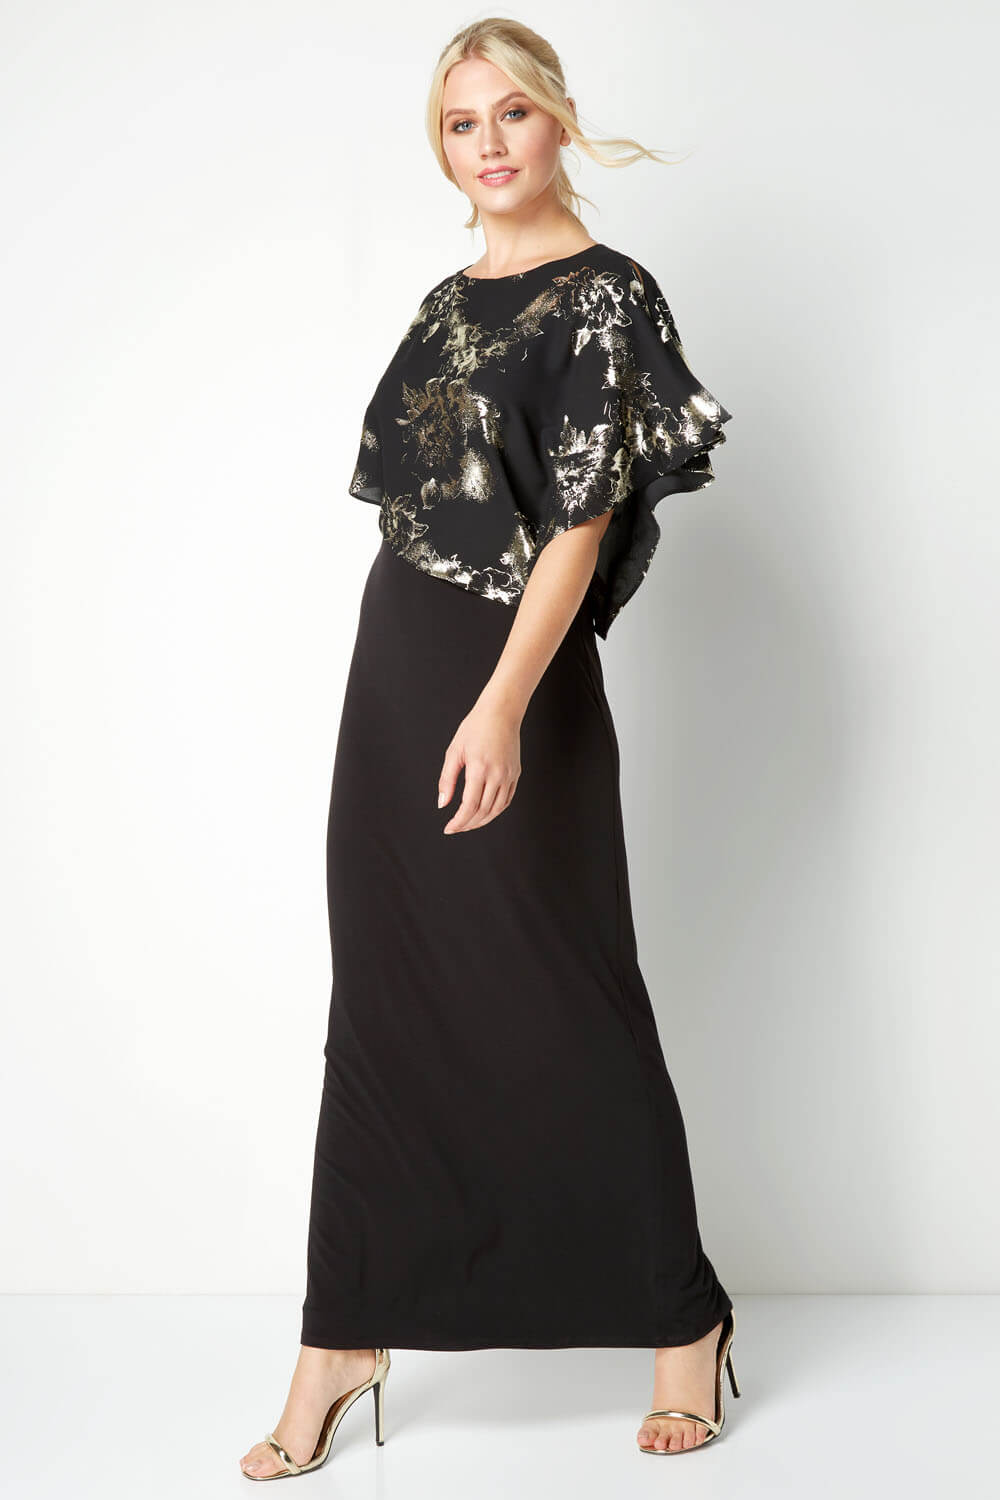 Gold Floral Overlay Maxi Dress, Image 2 of 5